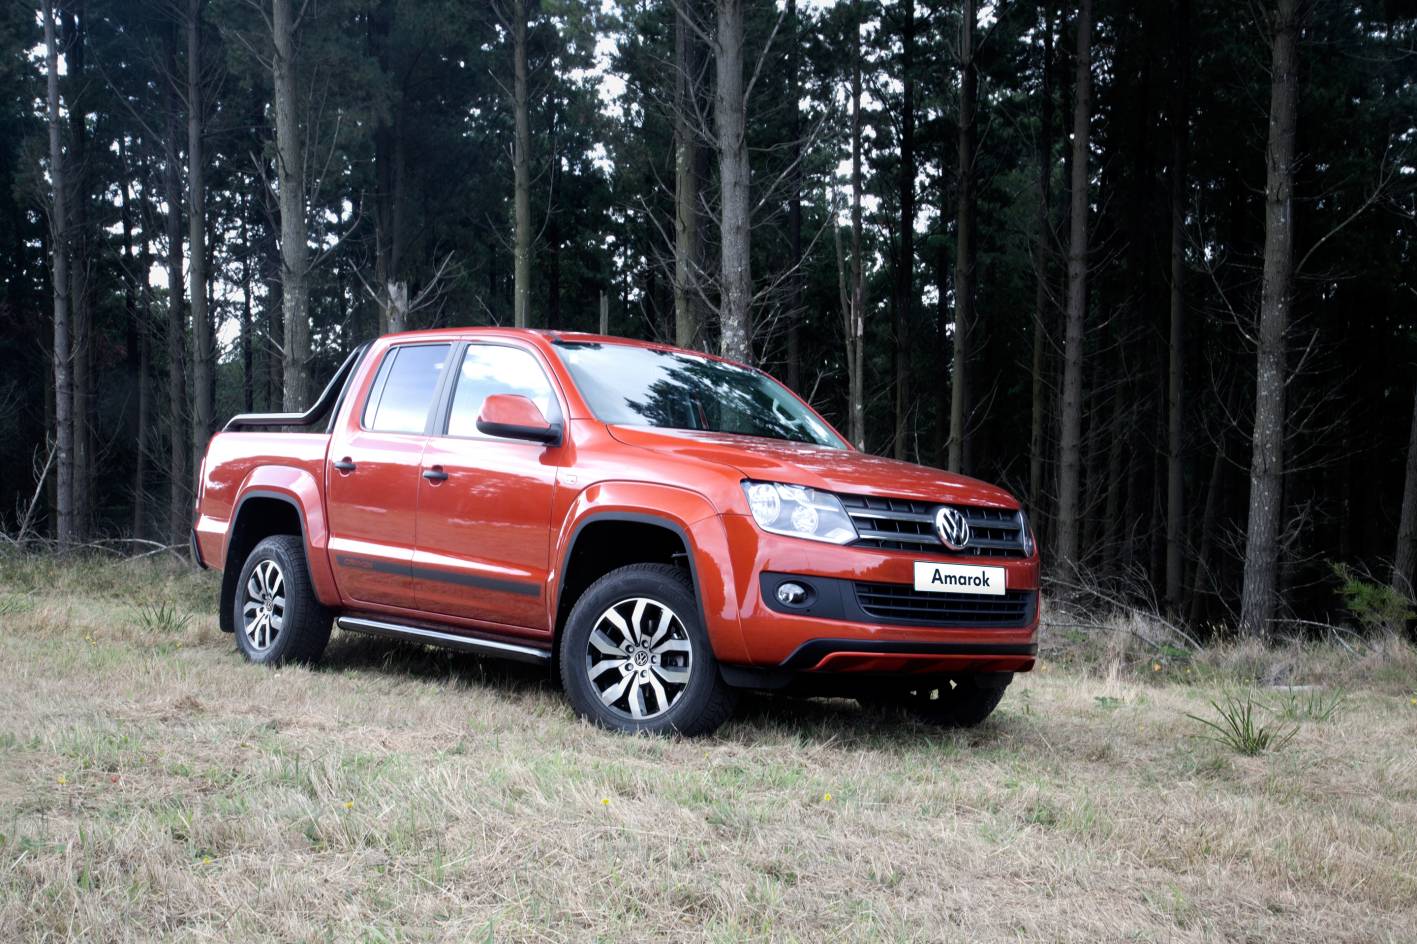 Volkswagen Amarok Canyon special edition now on sale